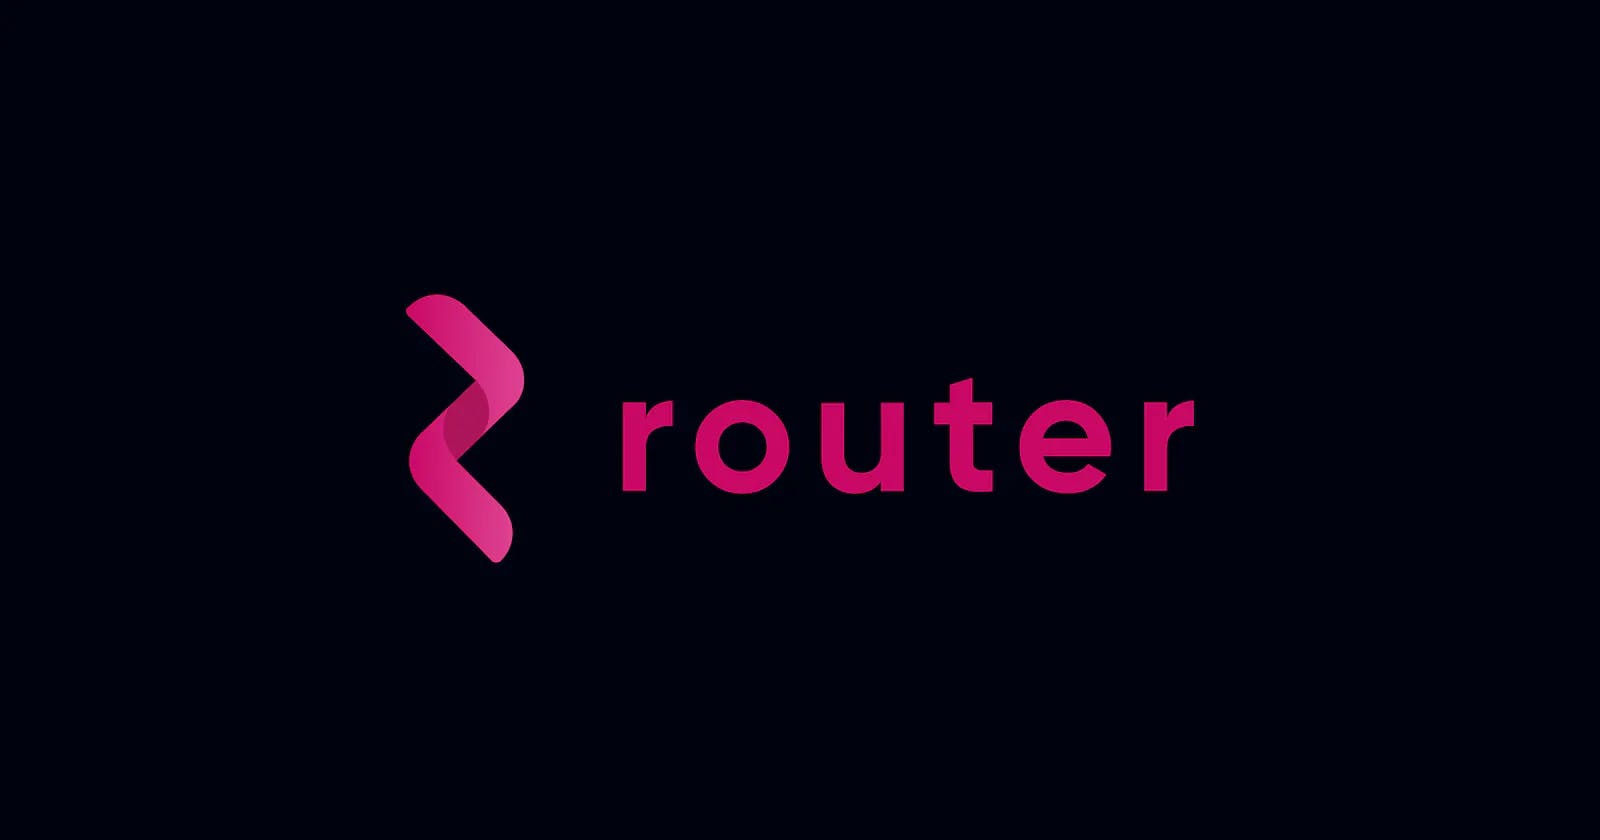 Let's understand router nitro and it's Architecture